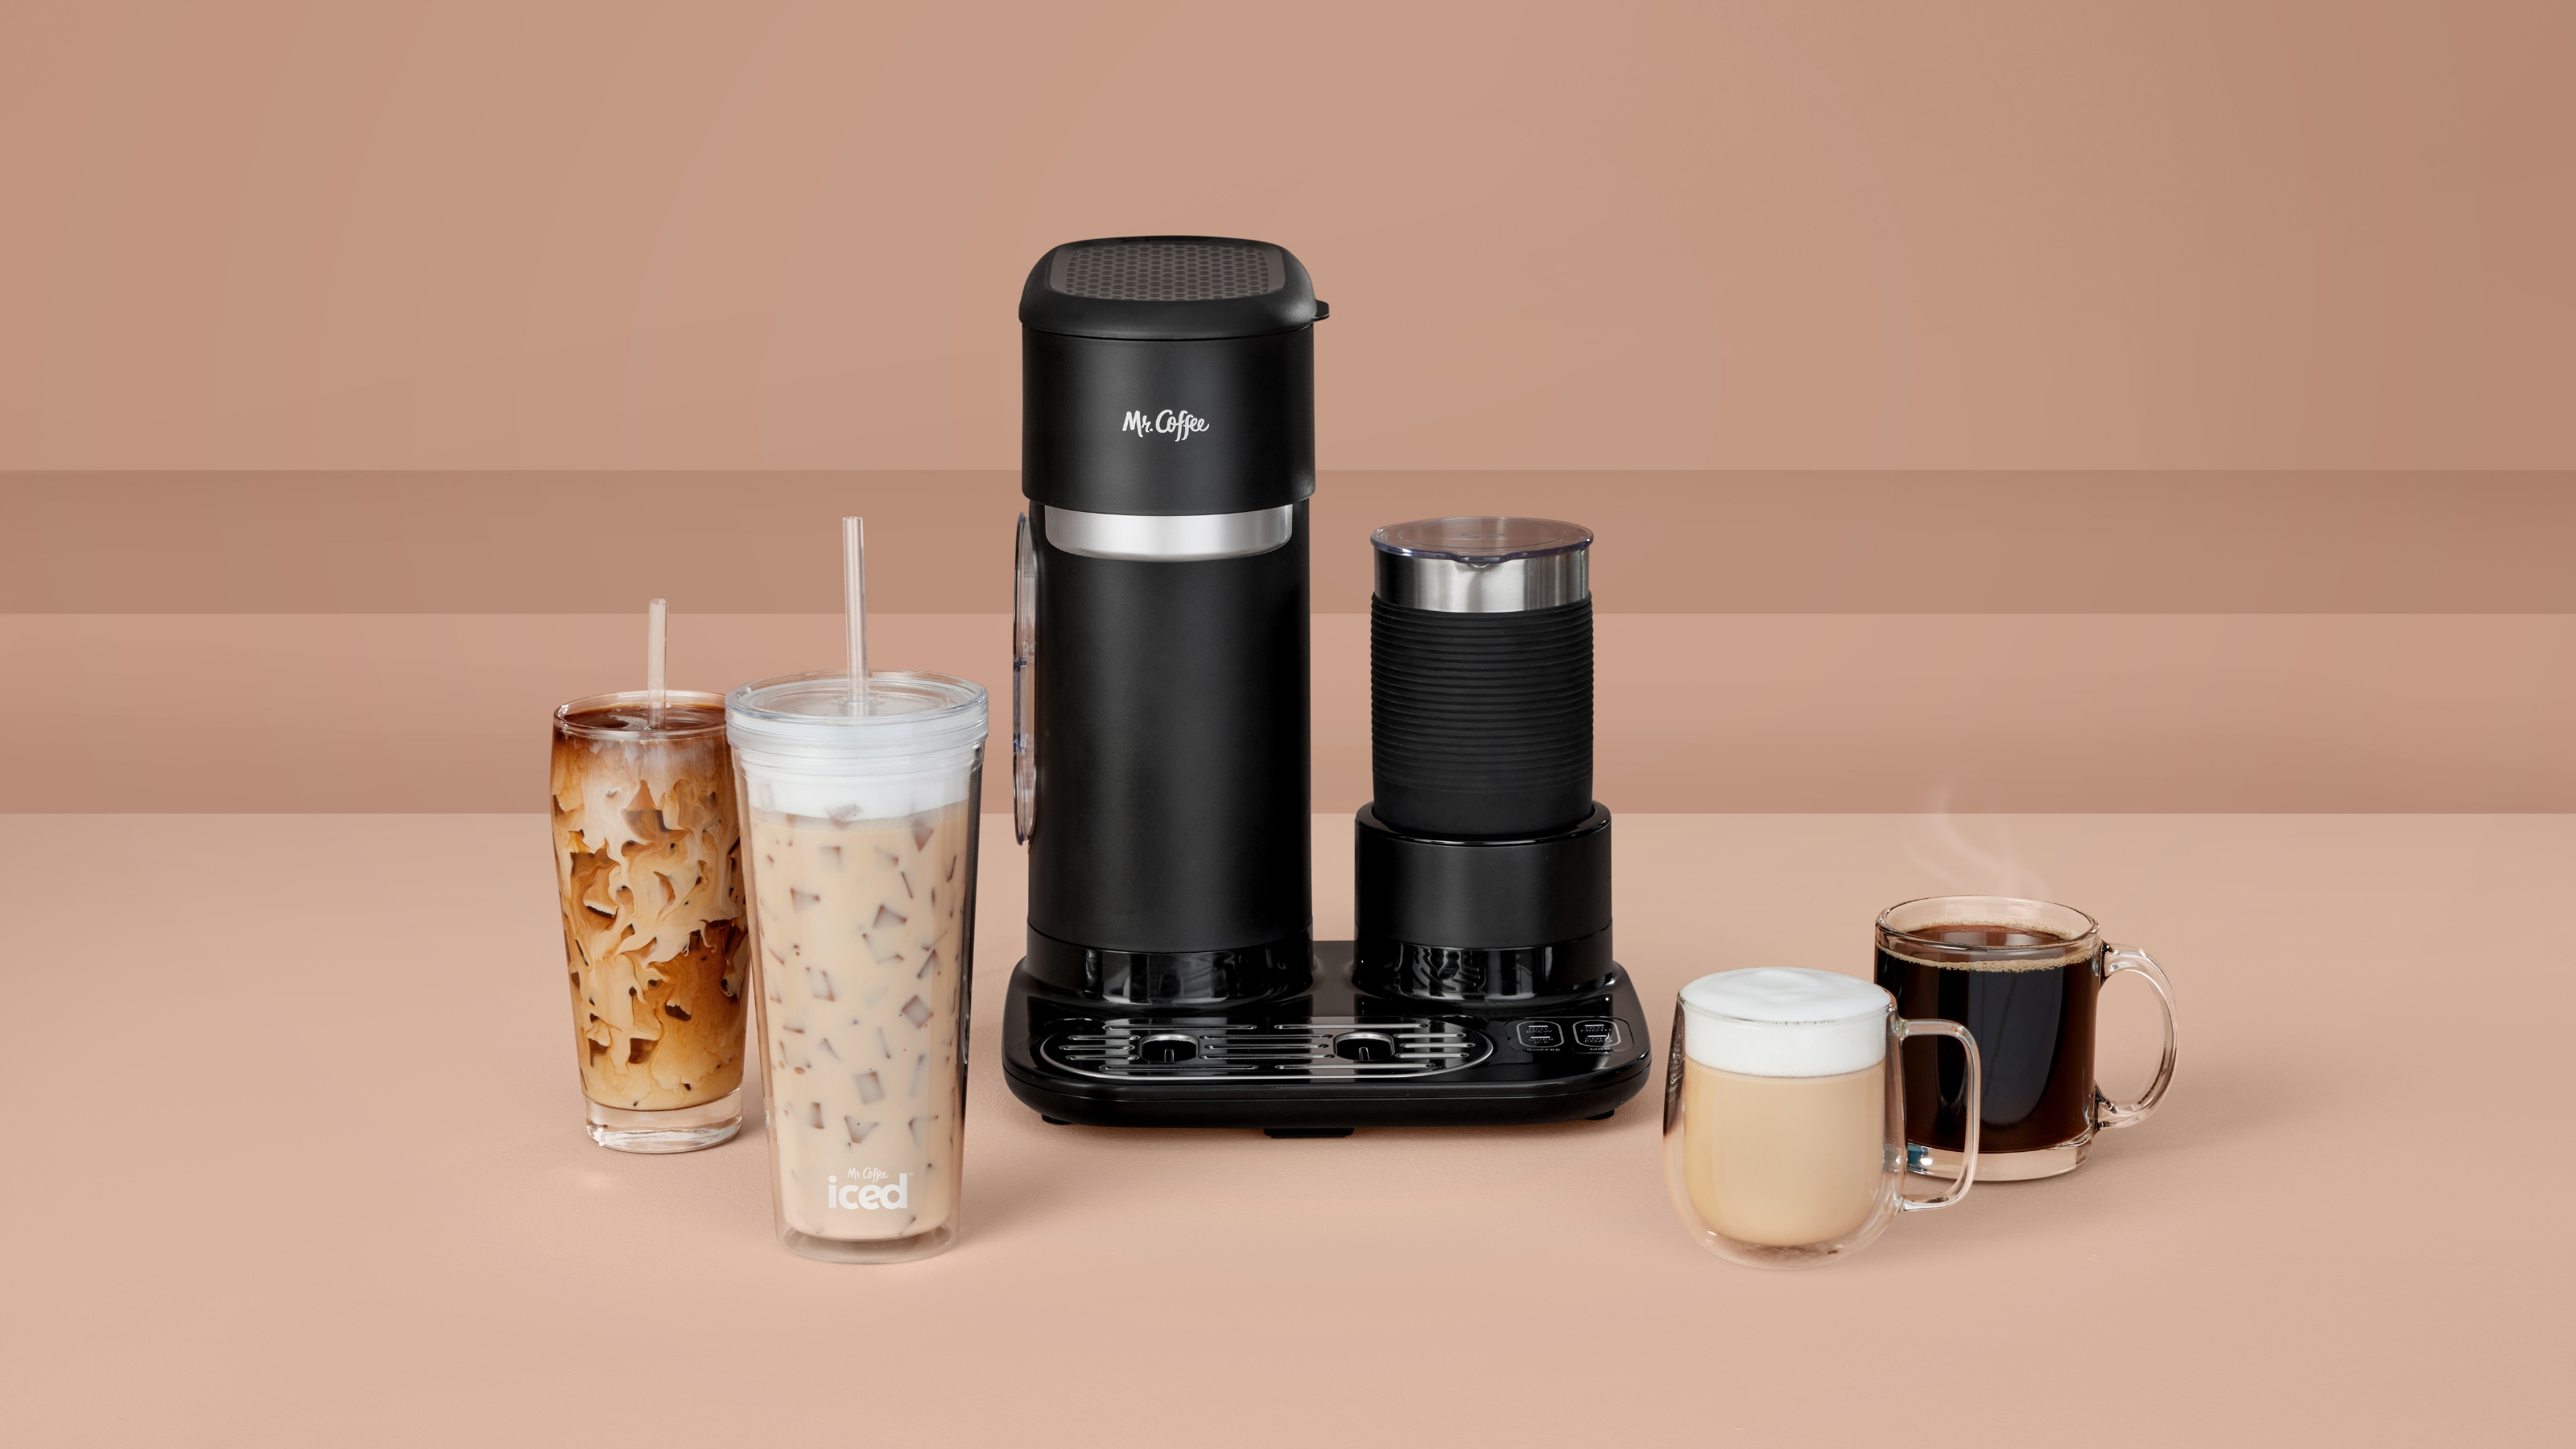 Honest Product Review: Mr. Iced Coffee Maker is a Big Win For